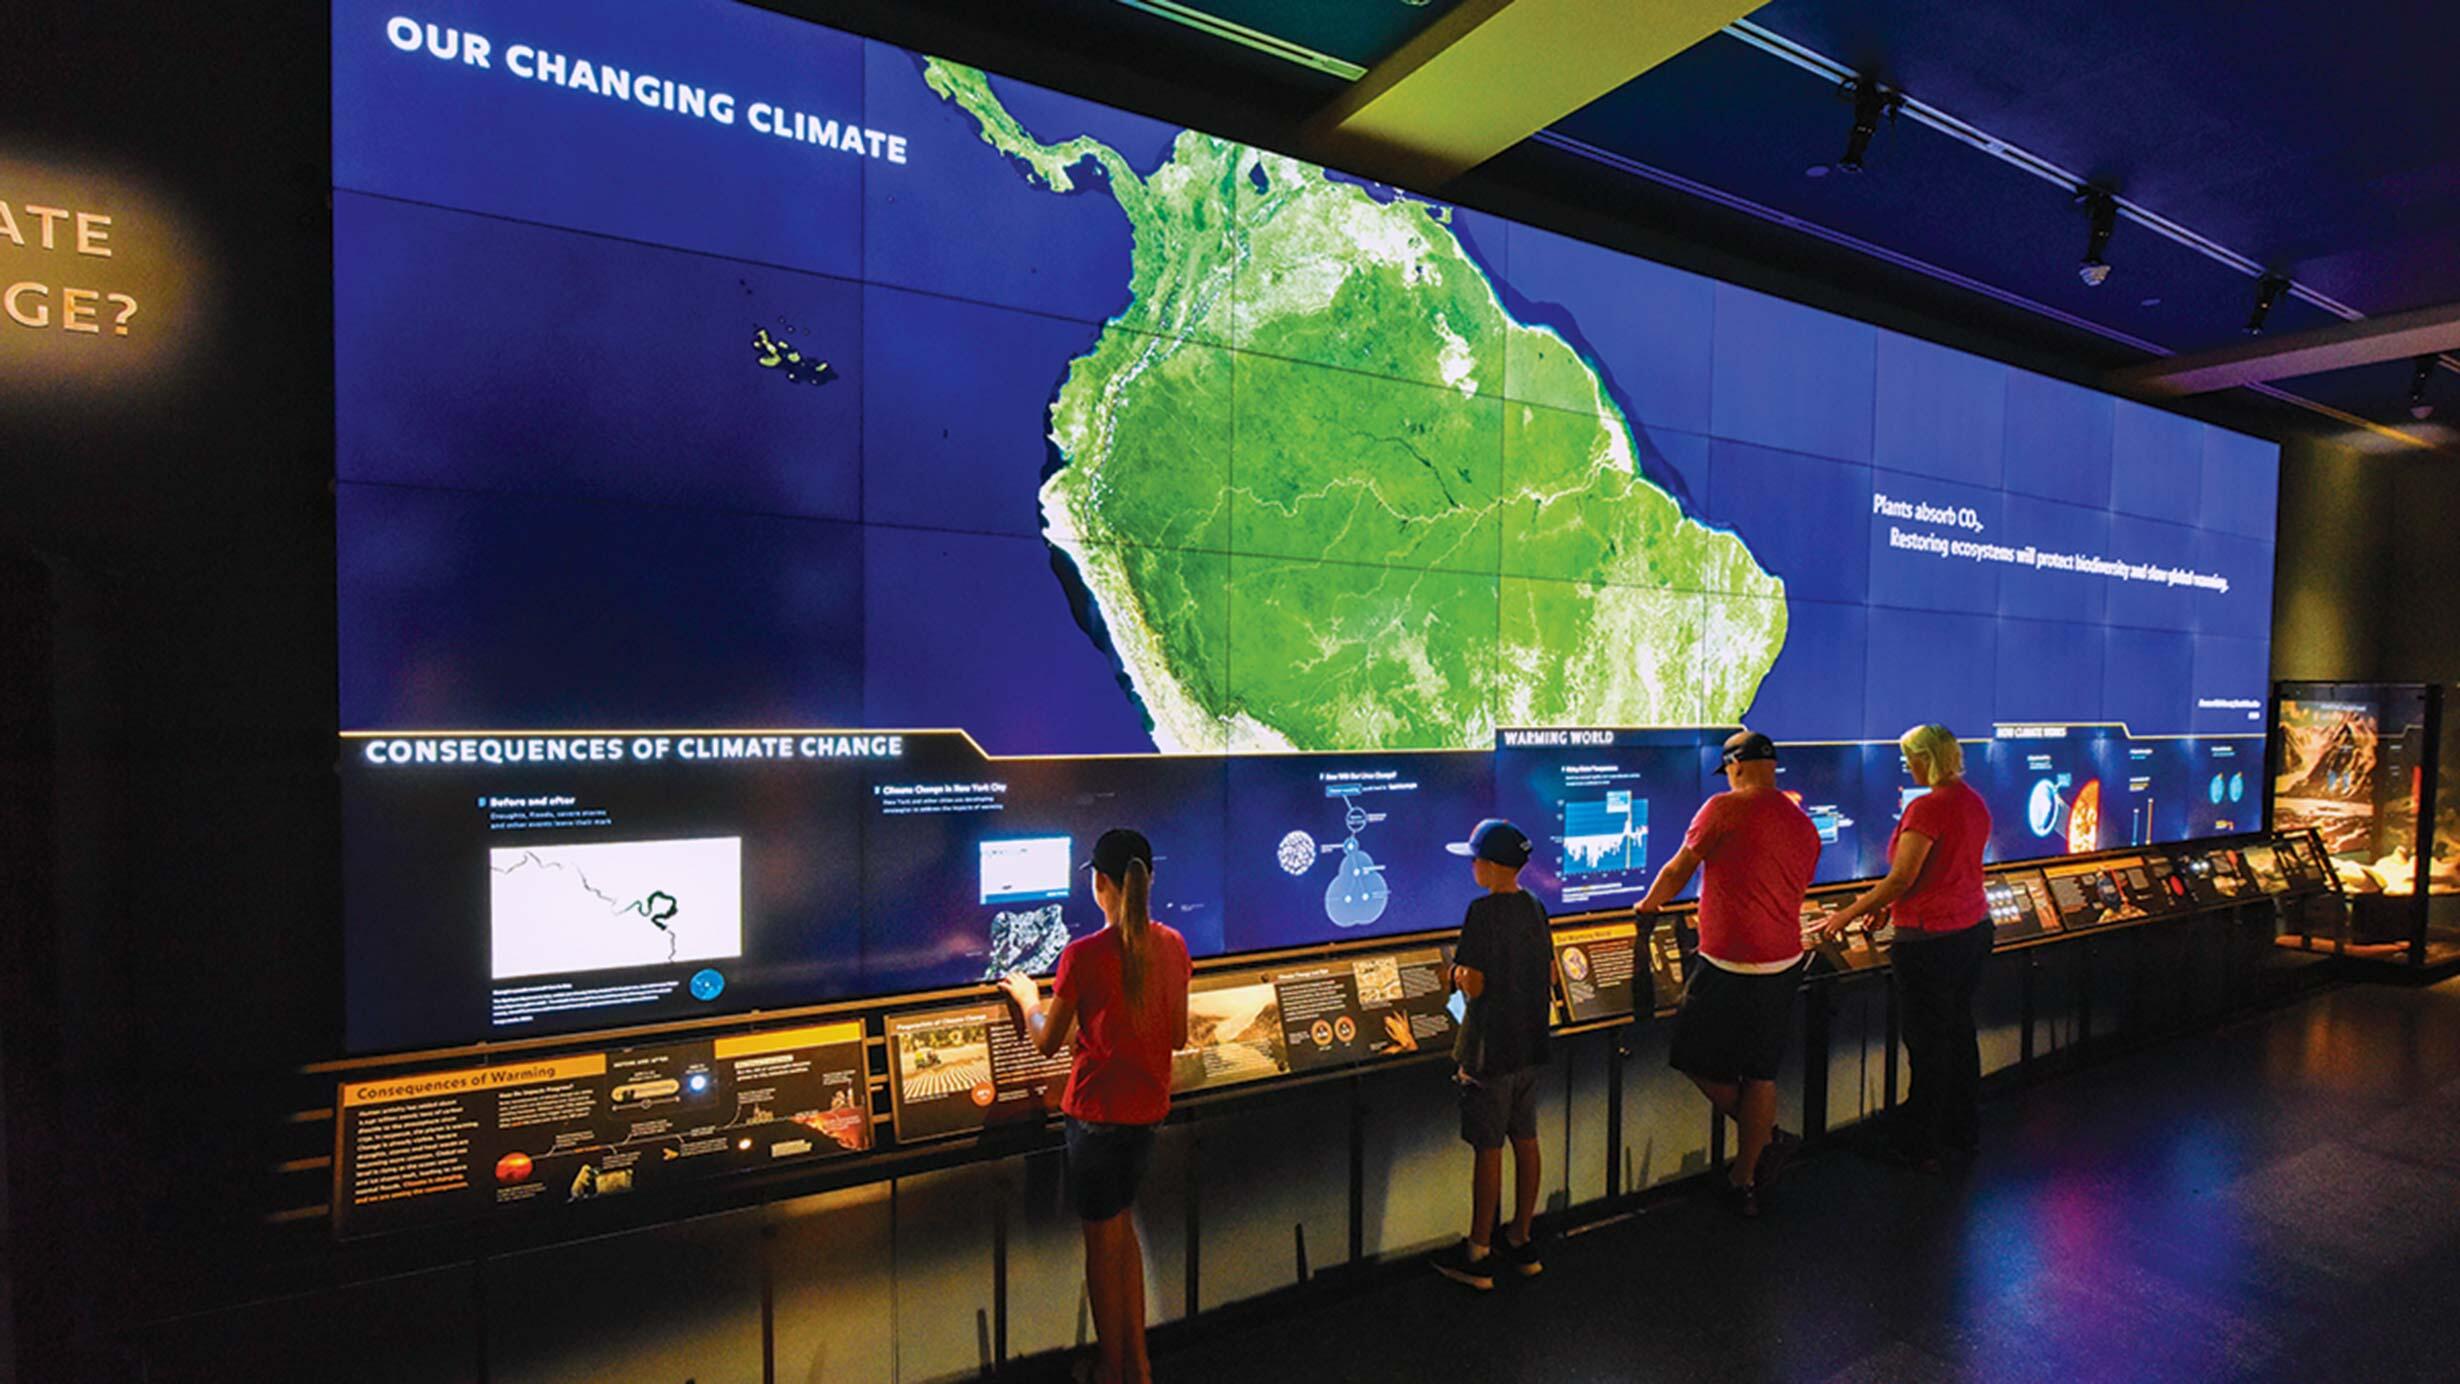 Visitors interact with the digital climate change wall in the Hall of Planet Earth.